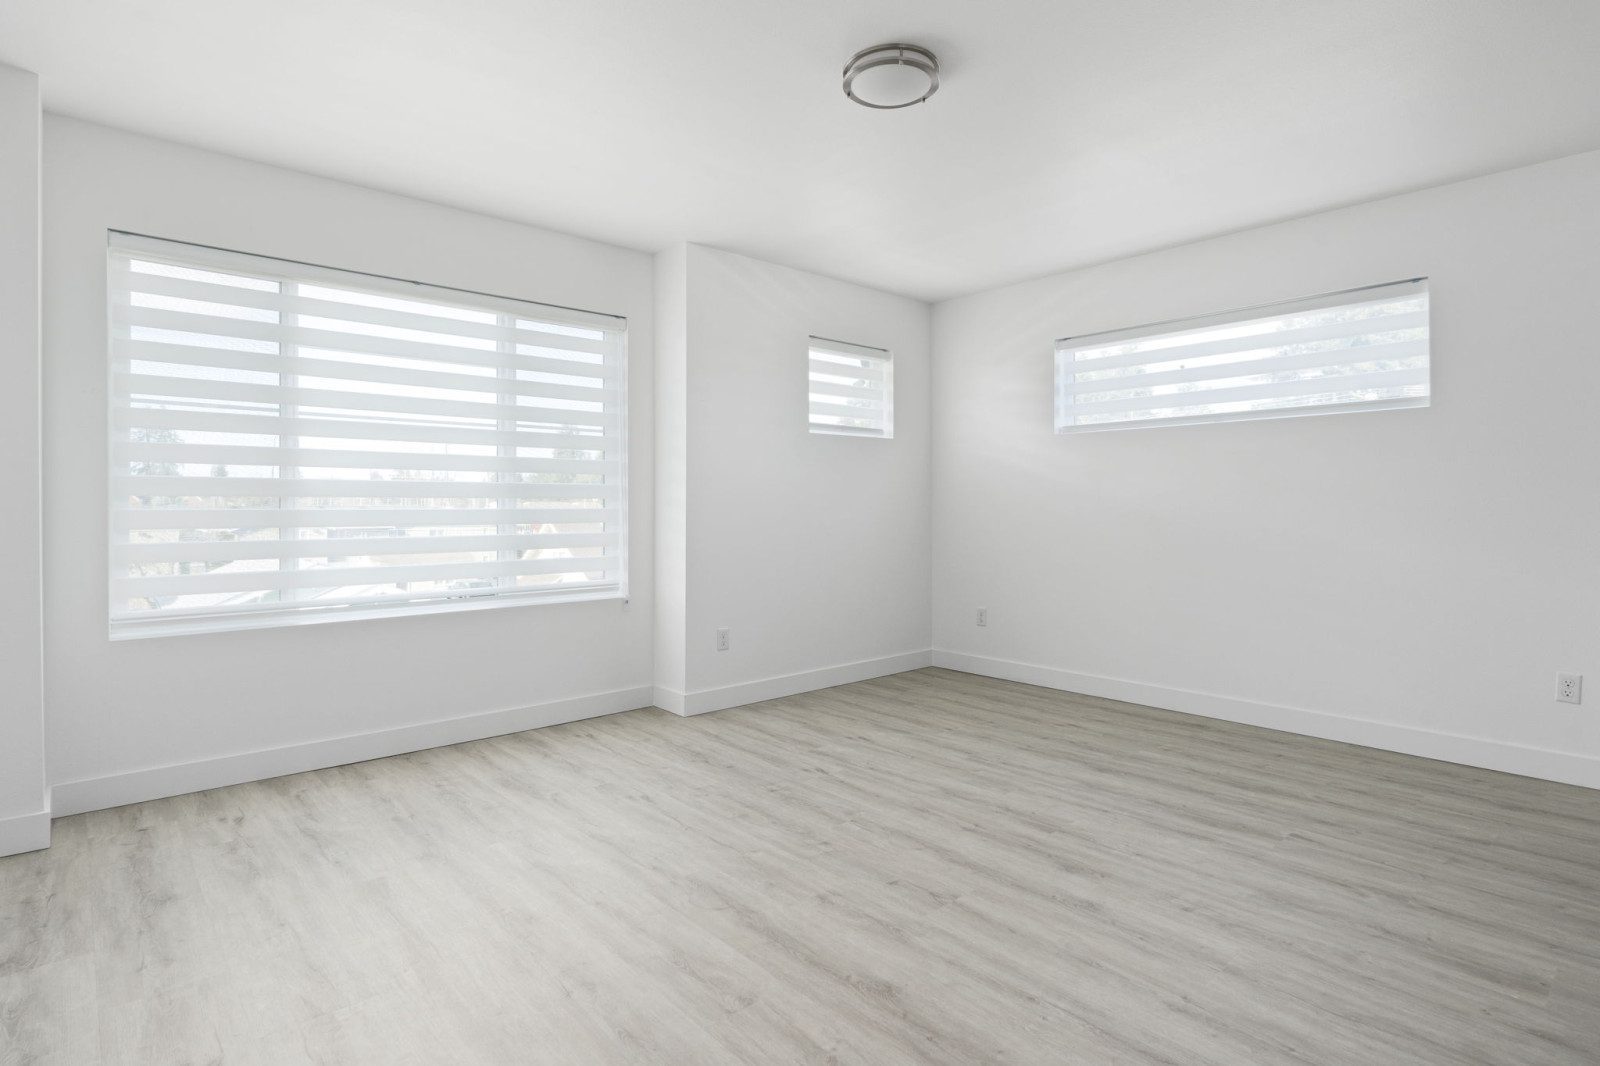 Virtual Staging Solutions now offers an empty room with white walls and wood floors ready for customization.